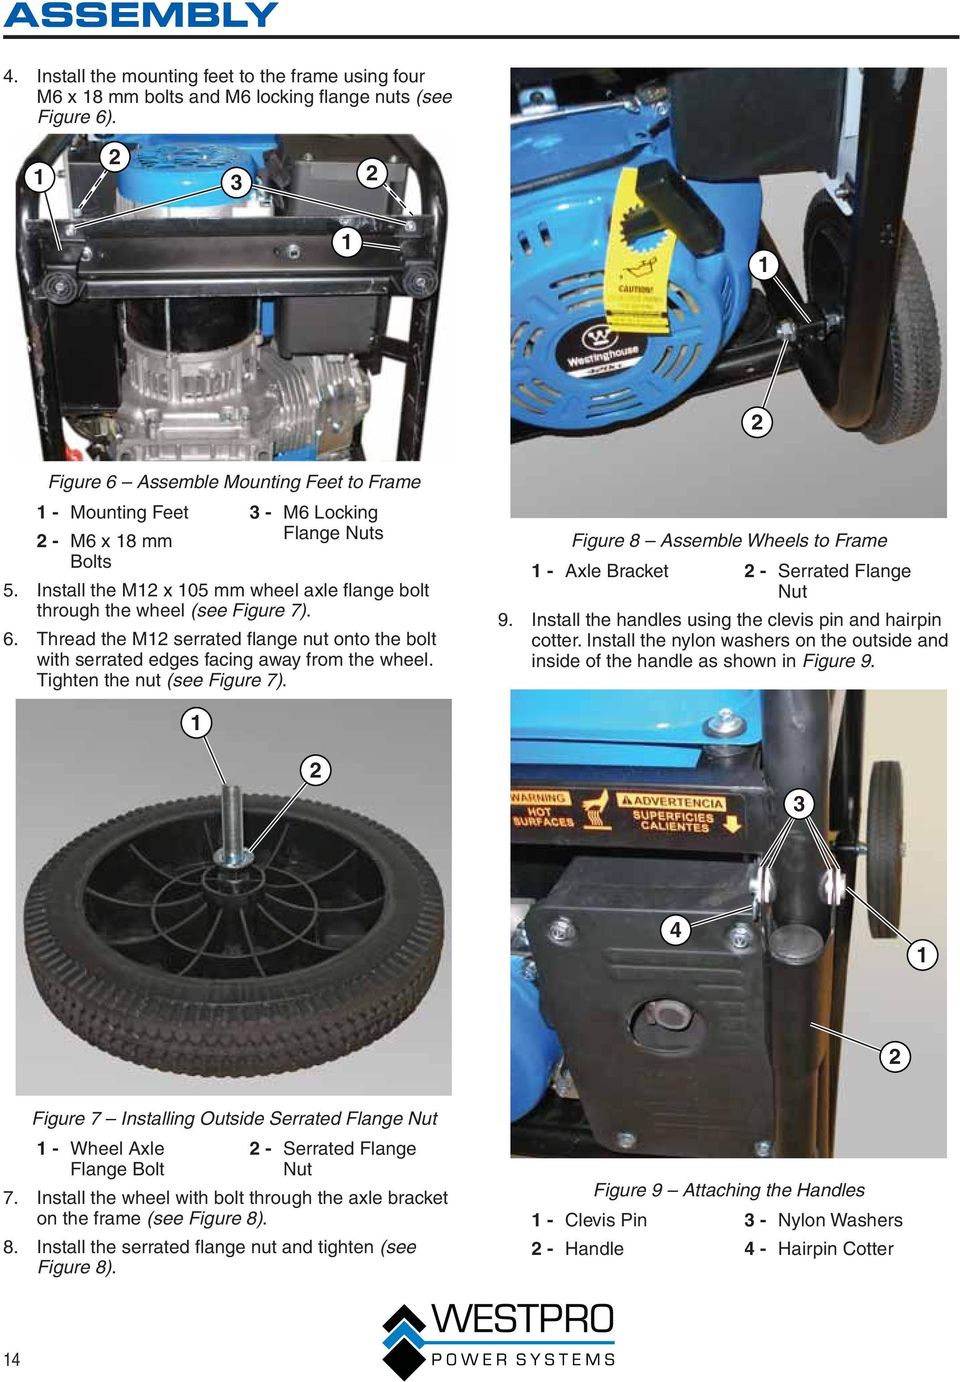 Tighten the nut (see Figure 7). Figure 8 Assemble Wheels to Frame - Axle Bracket 2 - Serrated Flange Nut 9. Install the handles using the clevis pin and hairpin cotter.